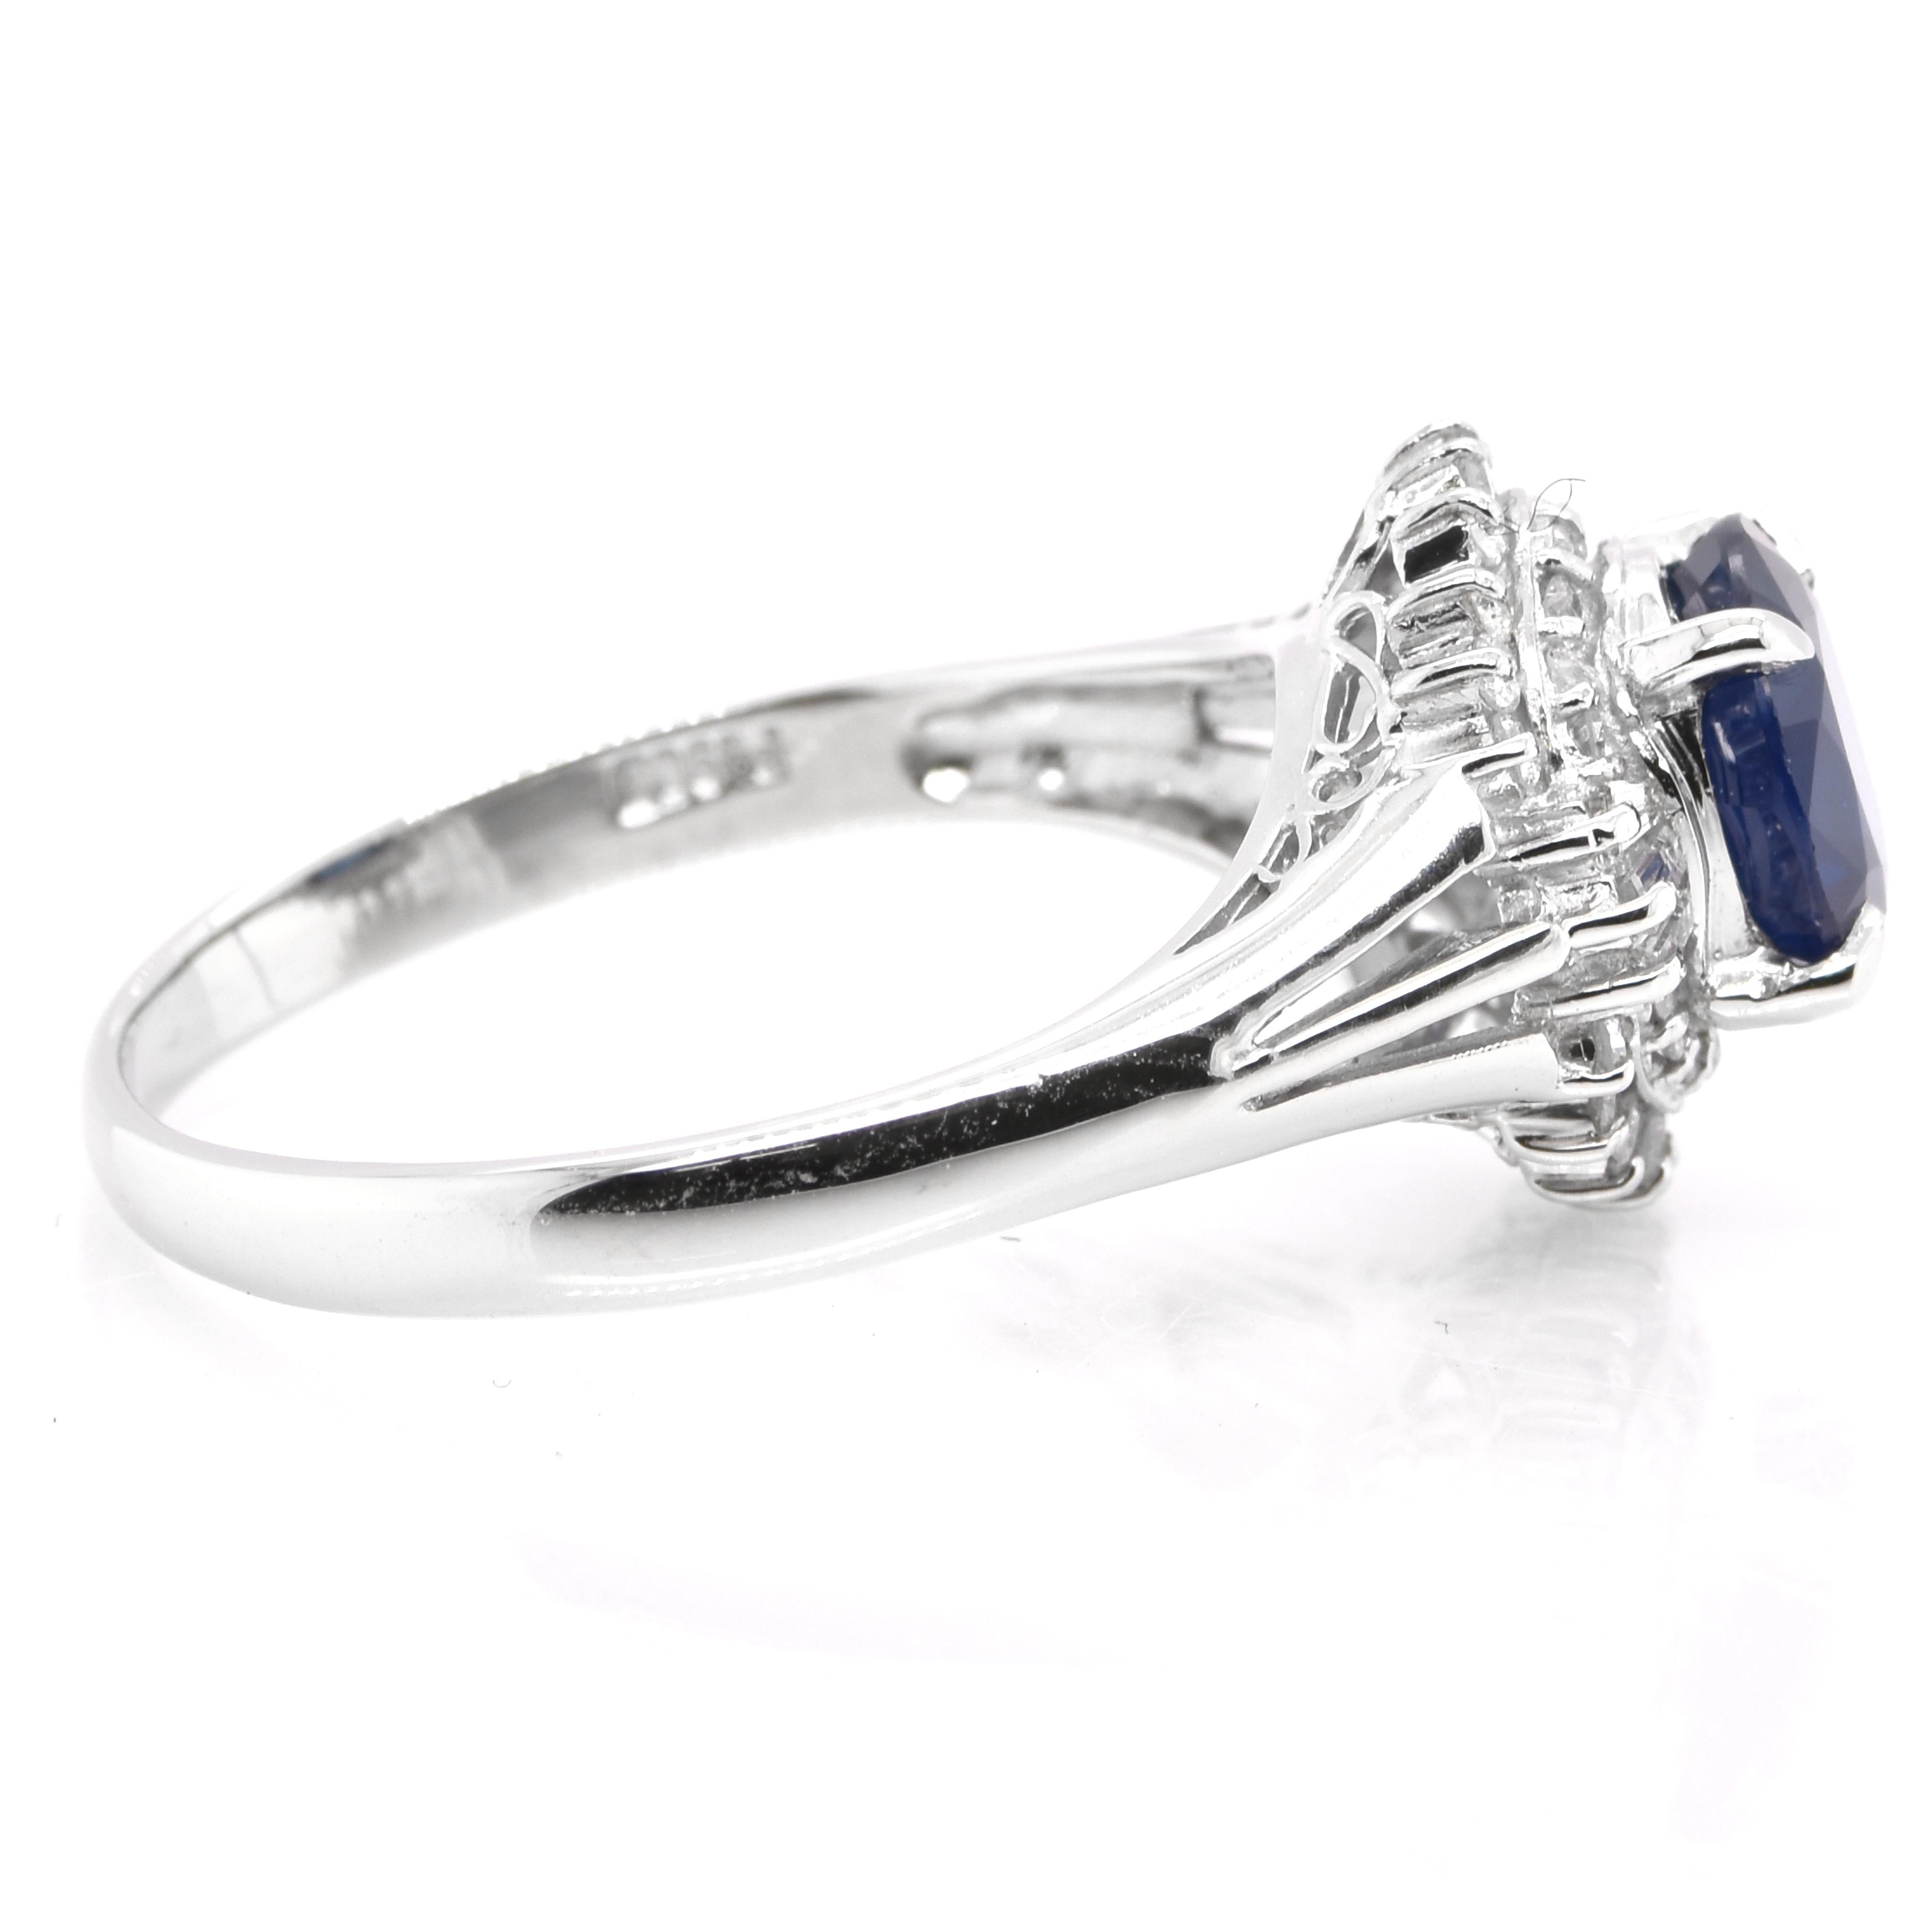 Oval Cut 1.57 Carat Natural Sapphire and Diamond Ballerina Cocktail Ring set in Platinum For Sale